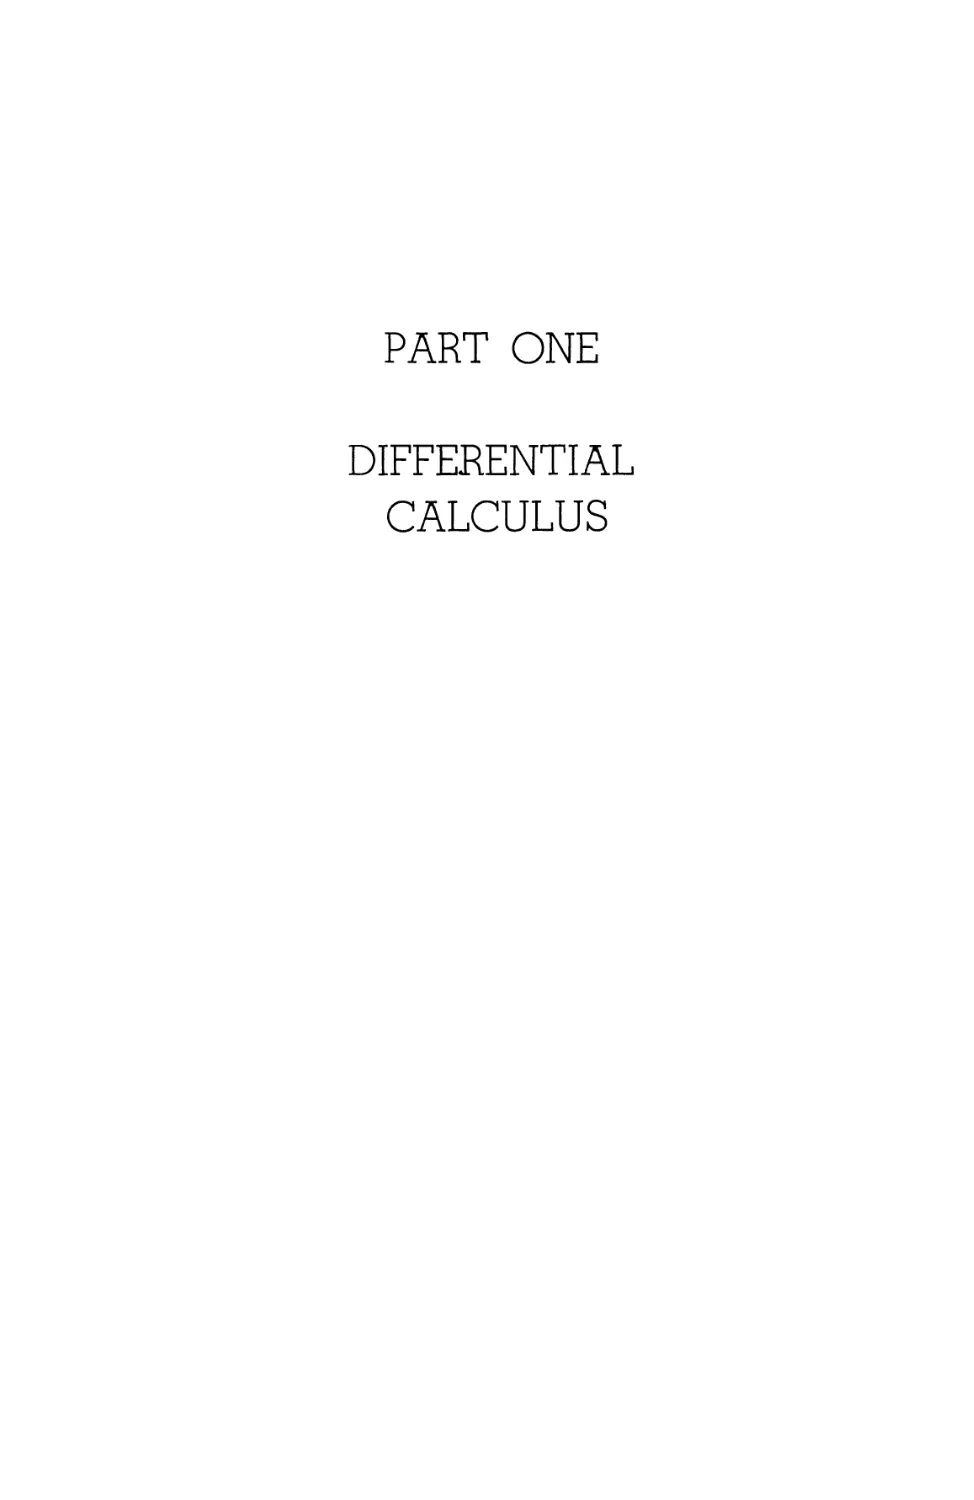 PART ONE. DIFFERENTIAL CALCULUS